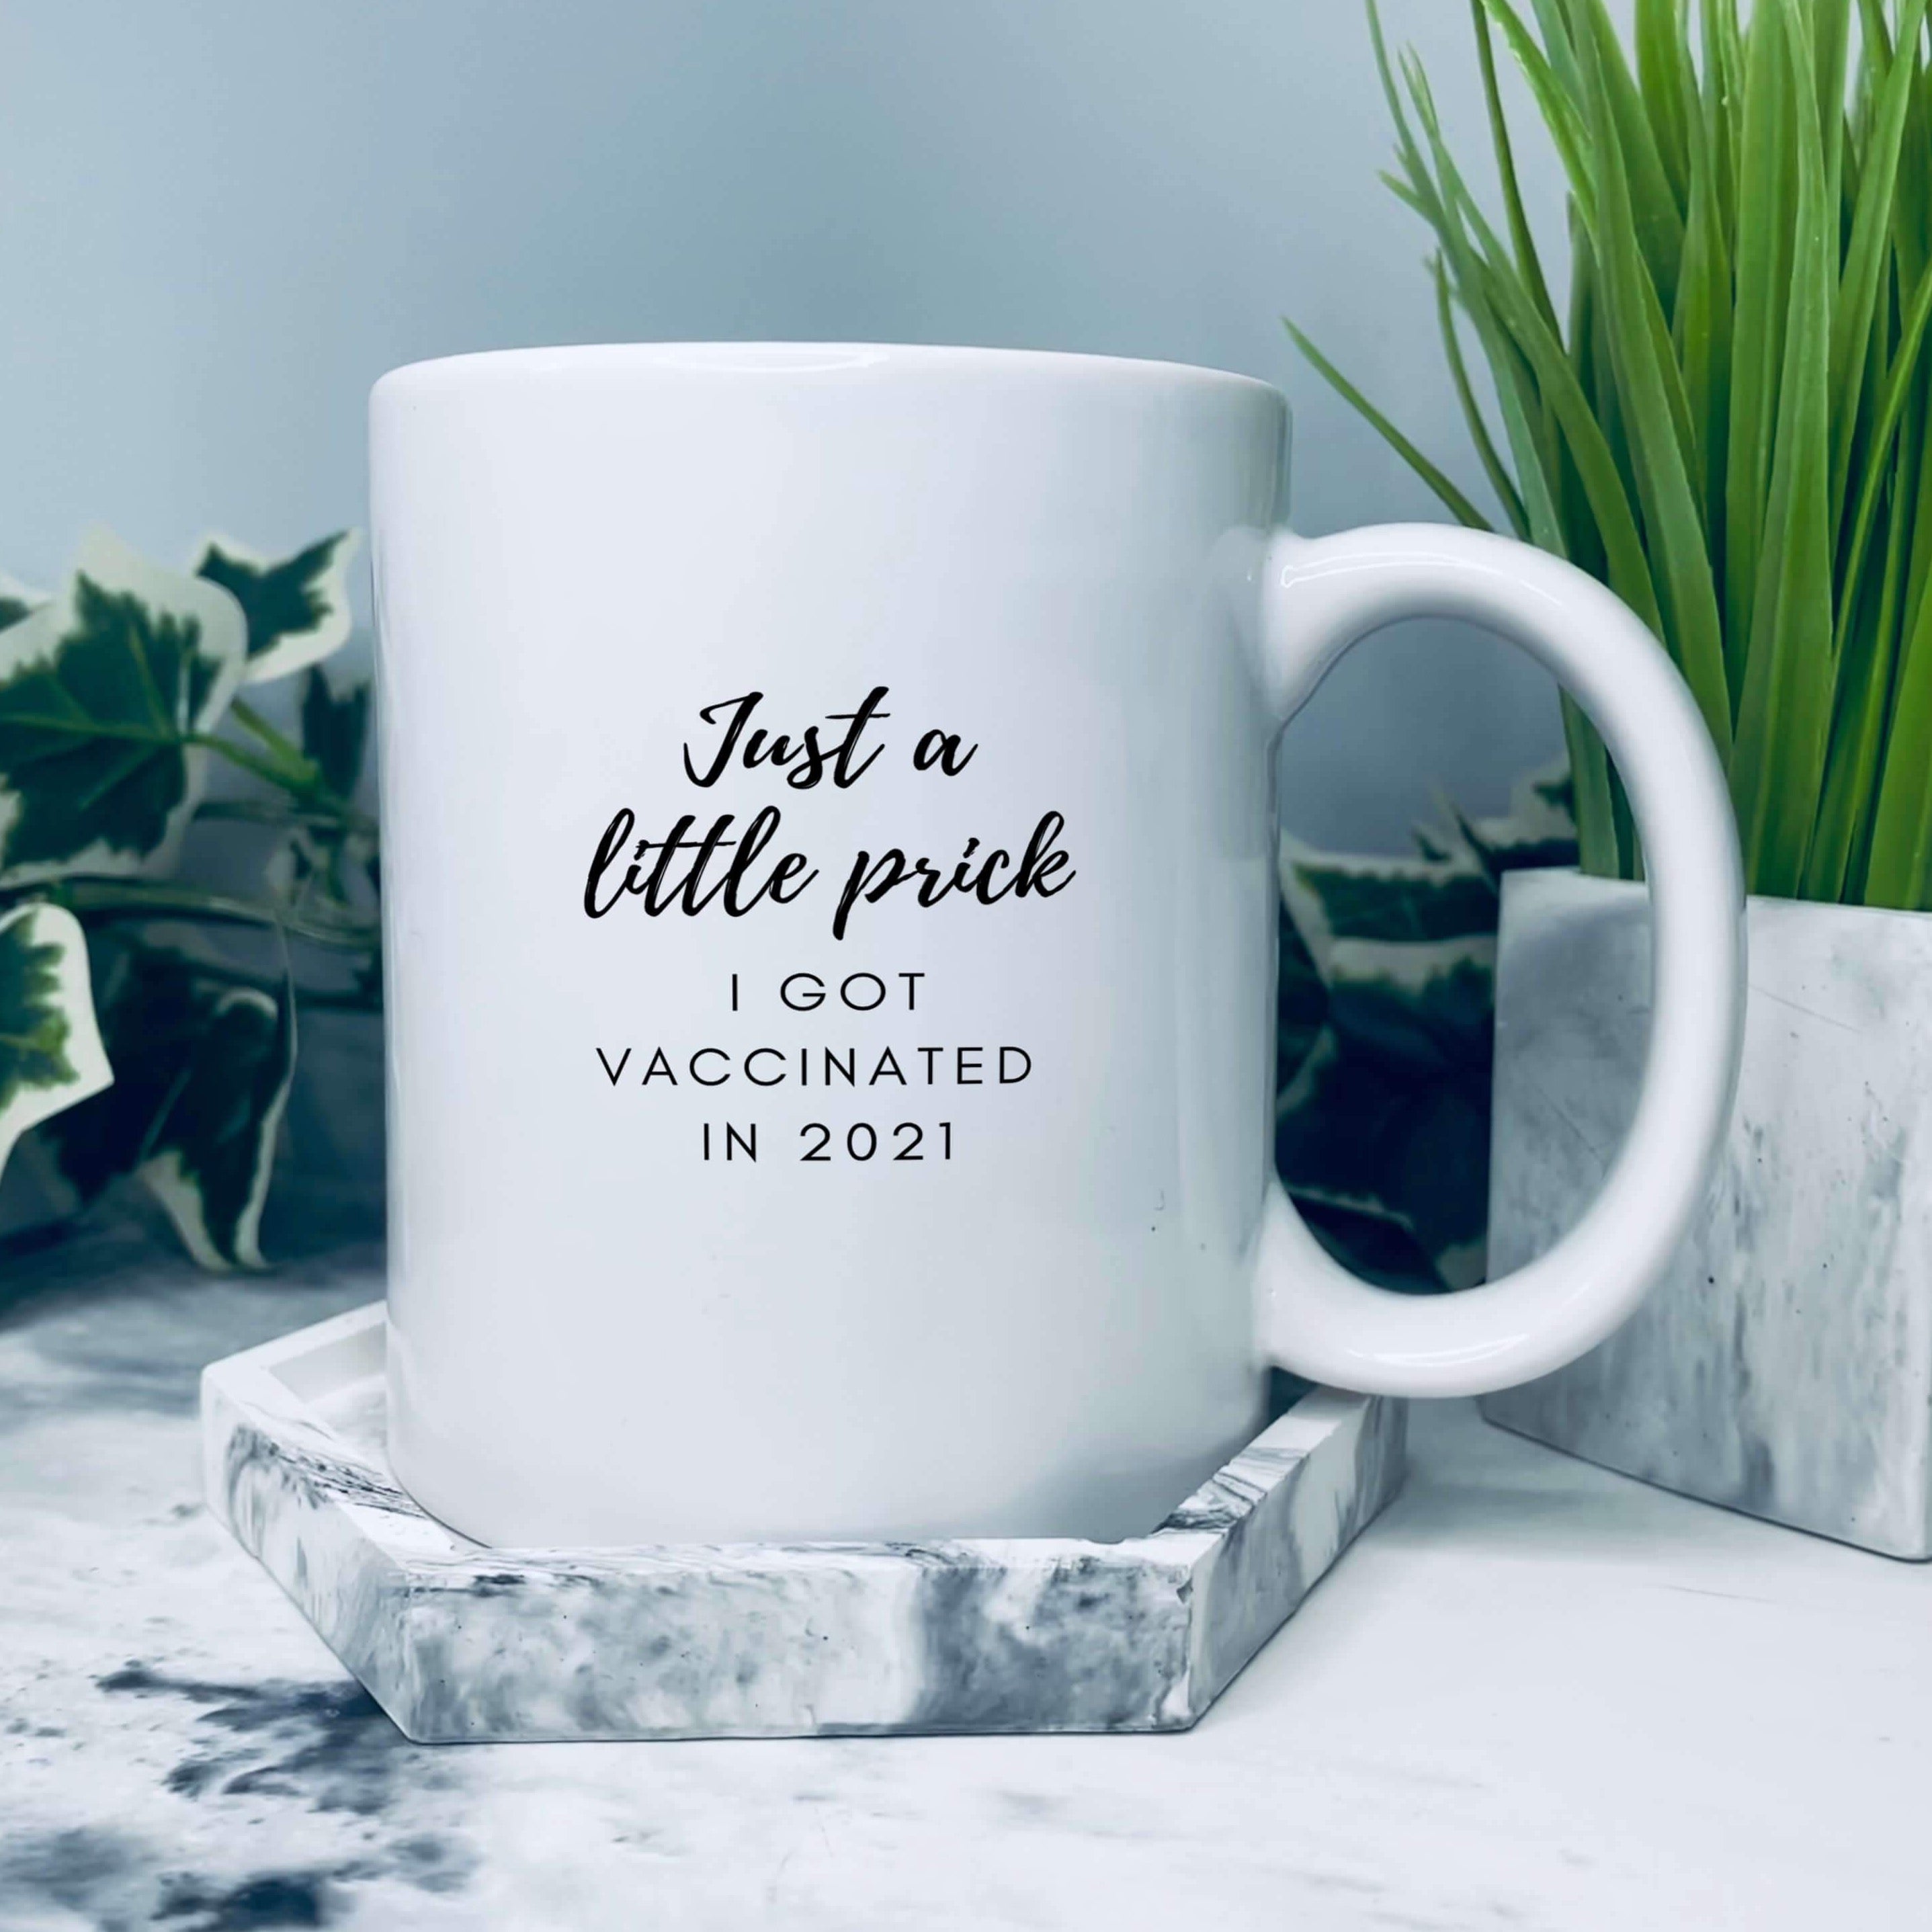 Mug that reads: Just a little prick, I got vaccinated in 2021